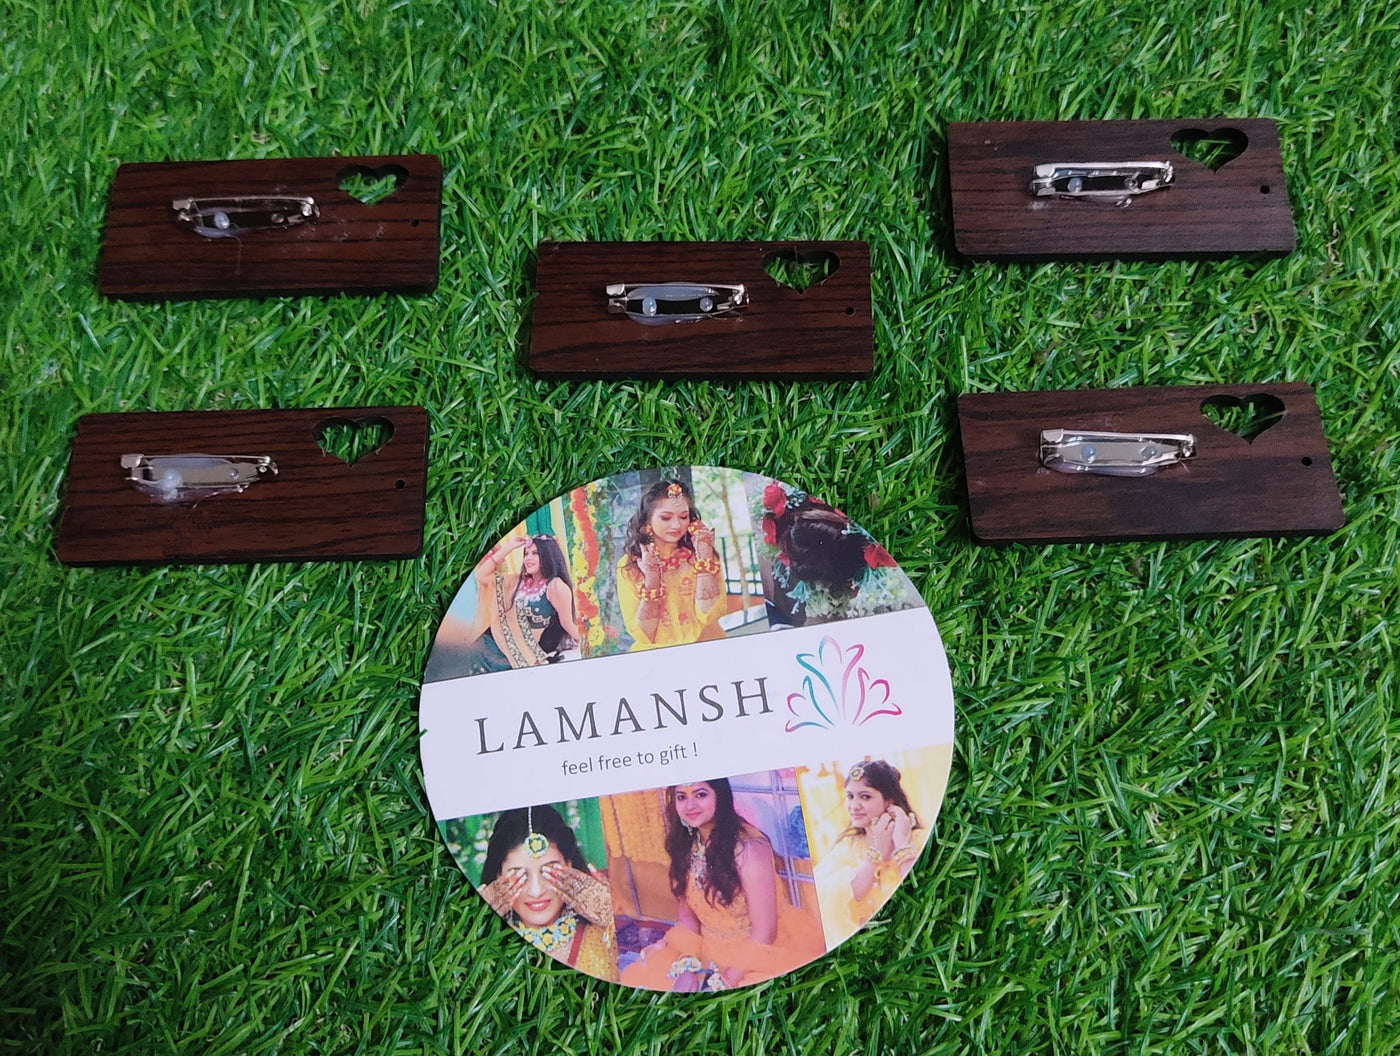 LAMANSH Floral 🌺 brooches LAMAMSH® Pack of 10 handmade wooden LADKIWALE brooches / badges for bride side guests barati in wedding / Indian wedding accessories